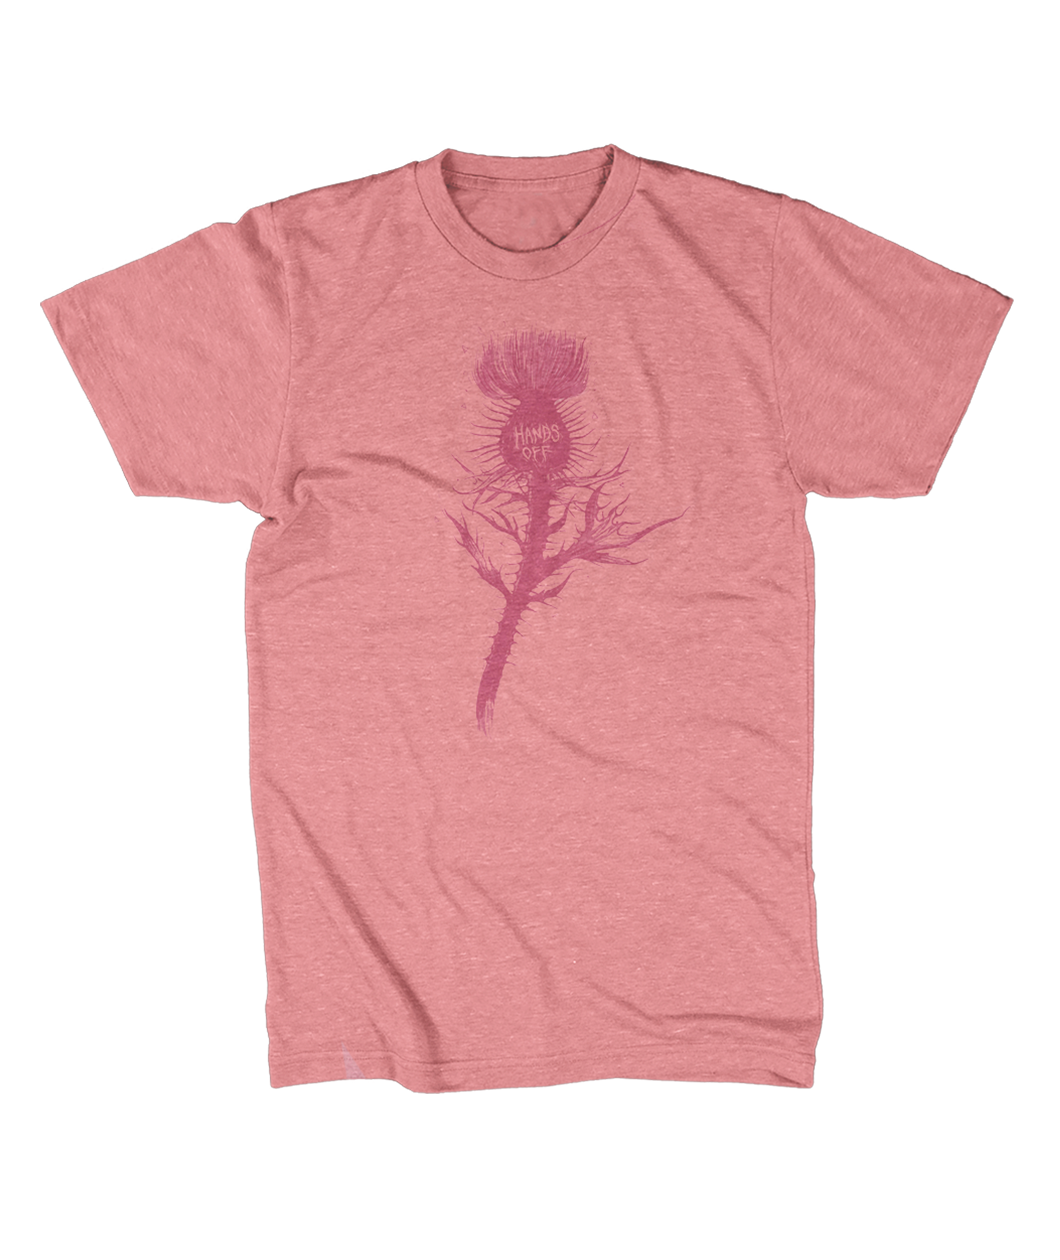 Red shirt with a dark red silhouette of a thistle weed in the center of the shirt. “Hands off” is written on the top of the thistle weed in red sans serif font - from Tyler Thrasher